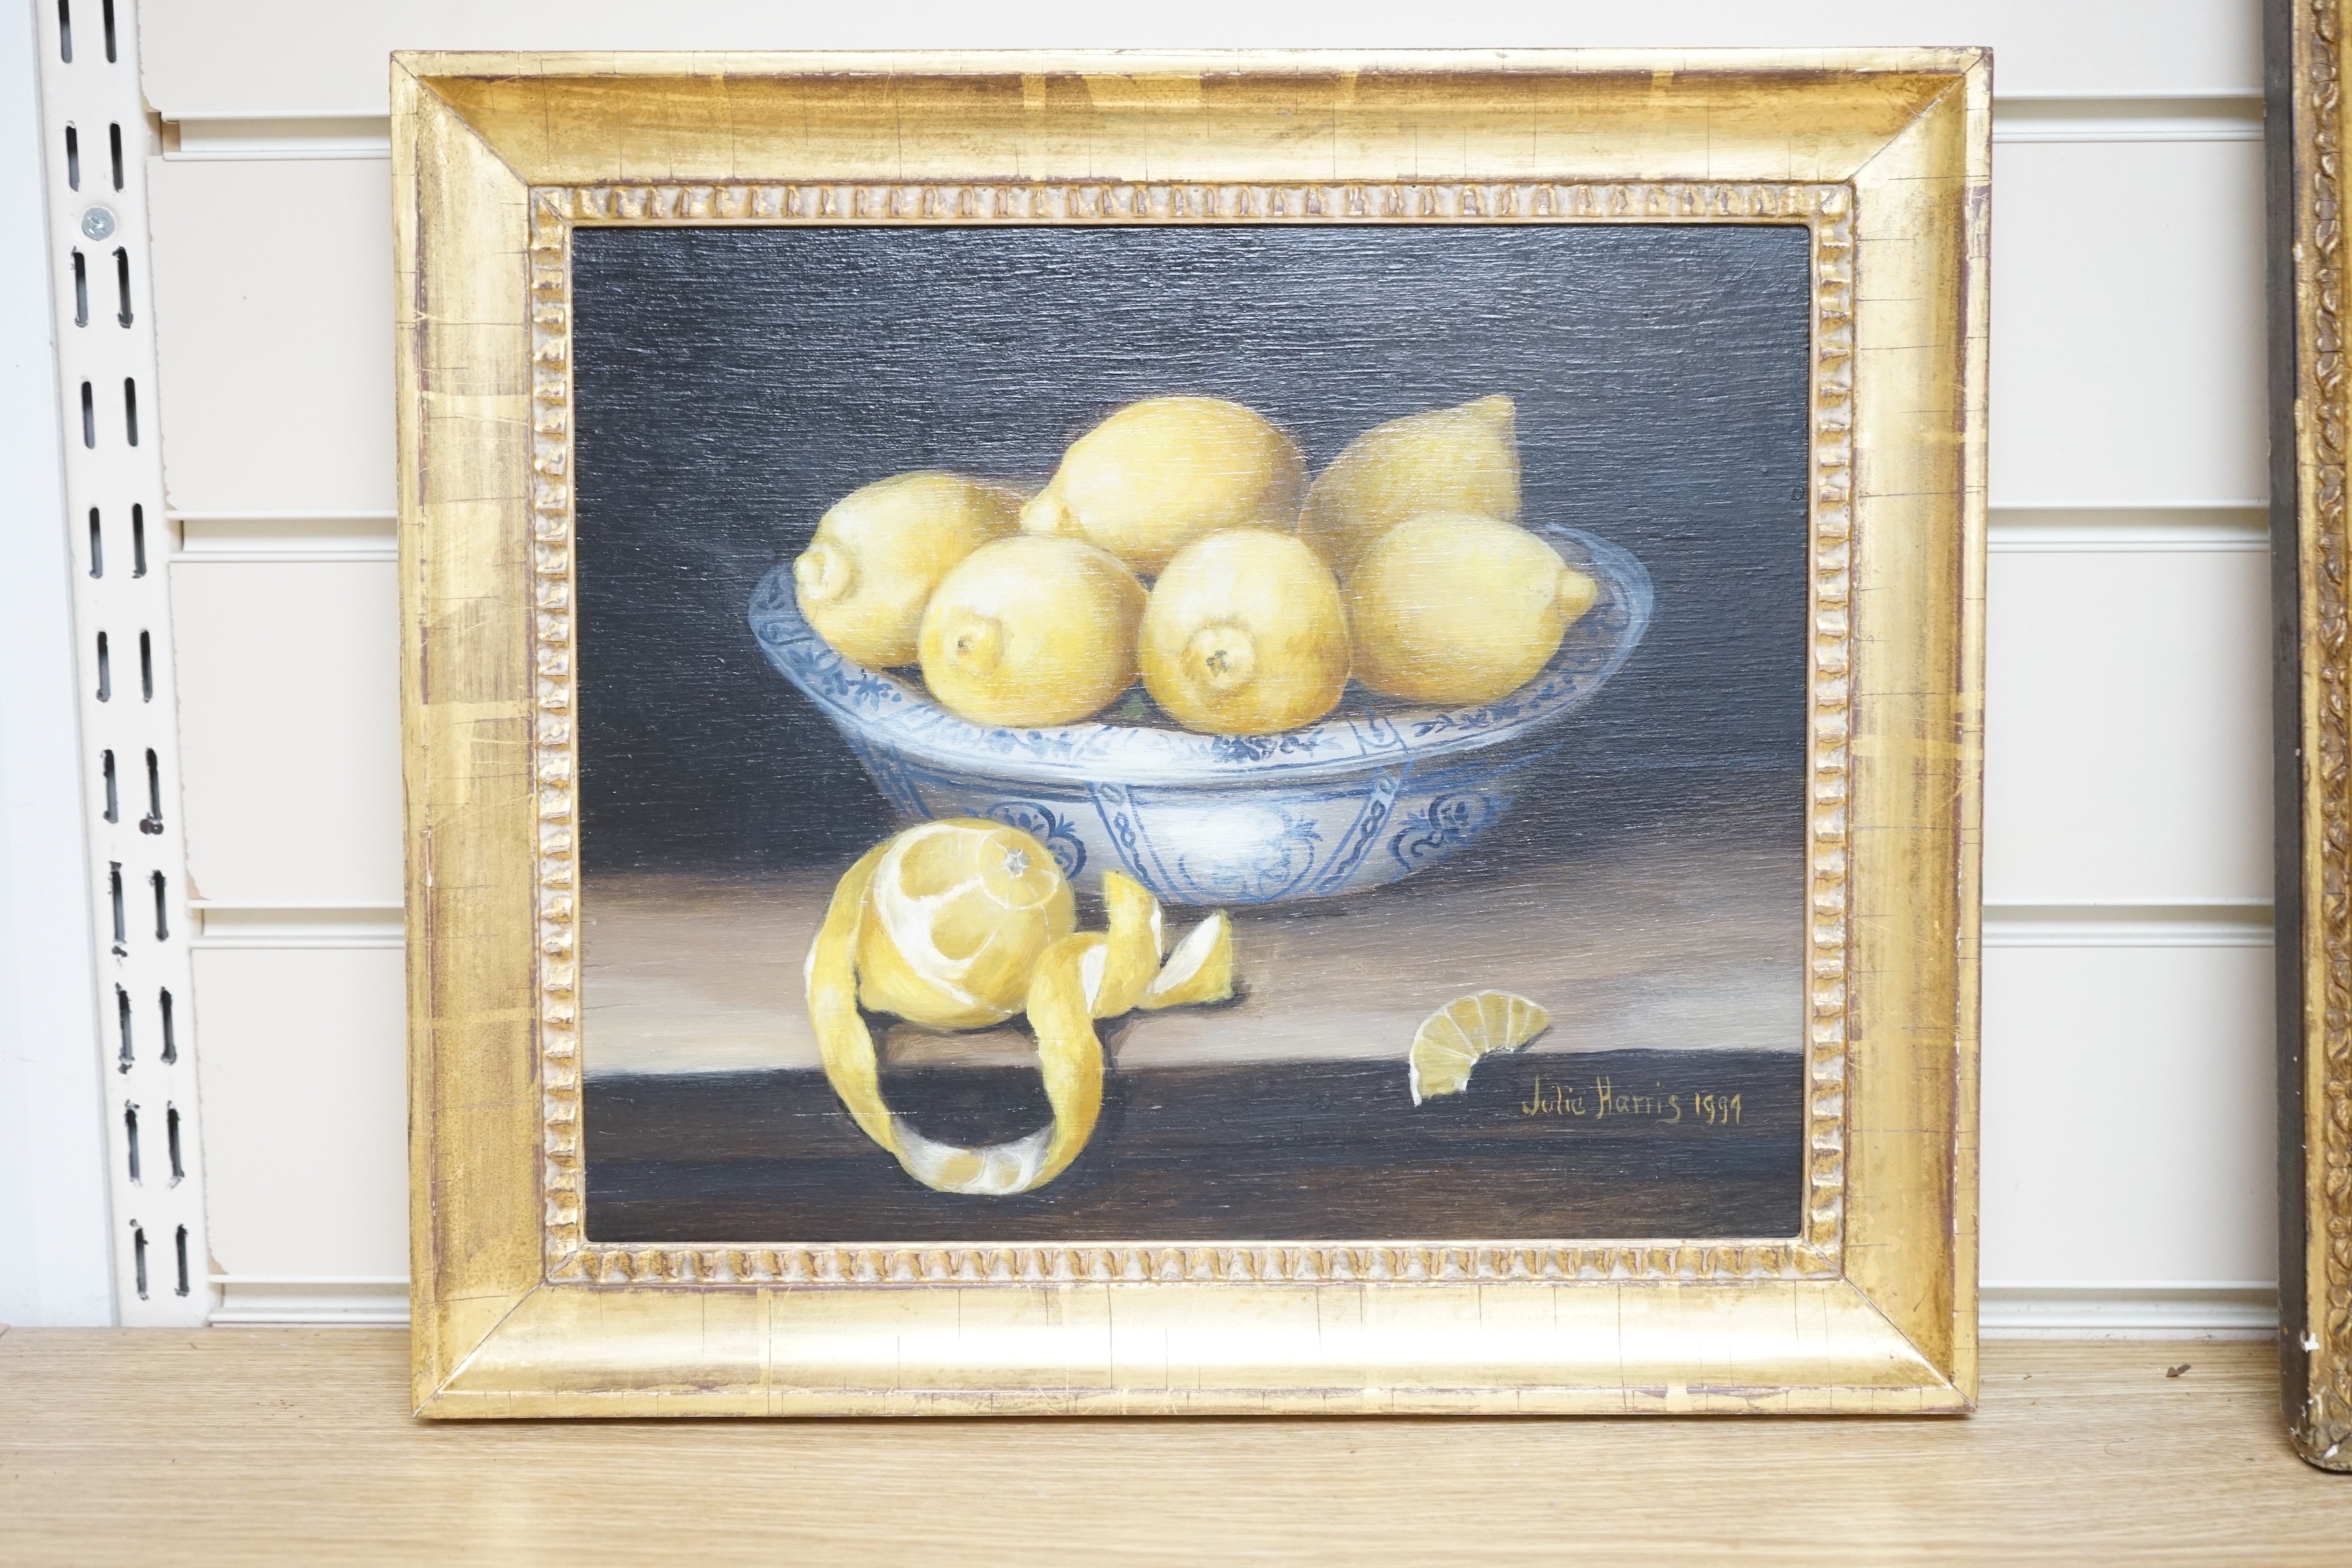 Julie Harris (b.1953), oil on panel, Still life of lemons in a delft bowl, signed and dated 1994, 24 x 30cm